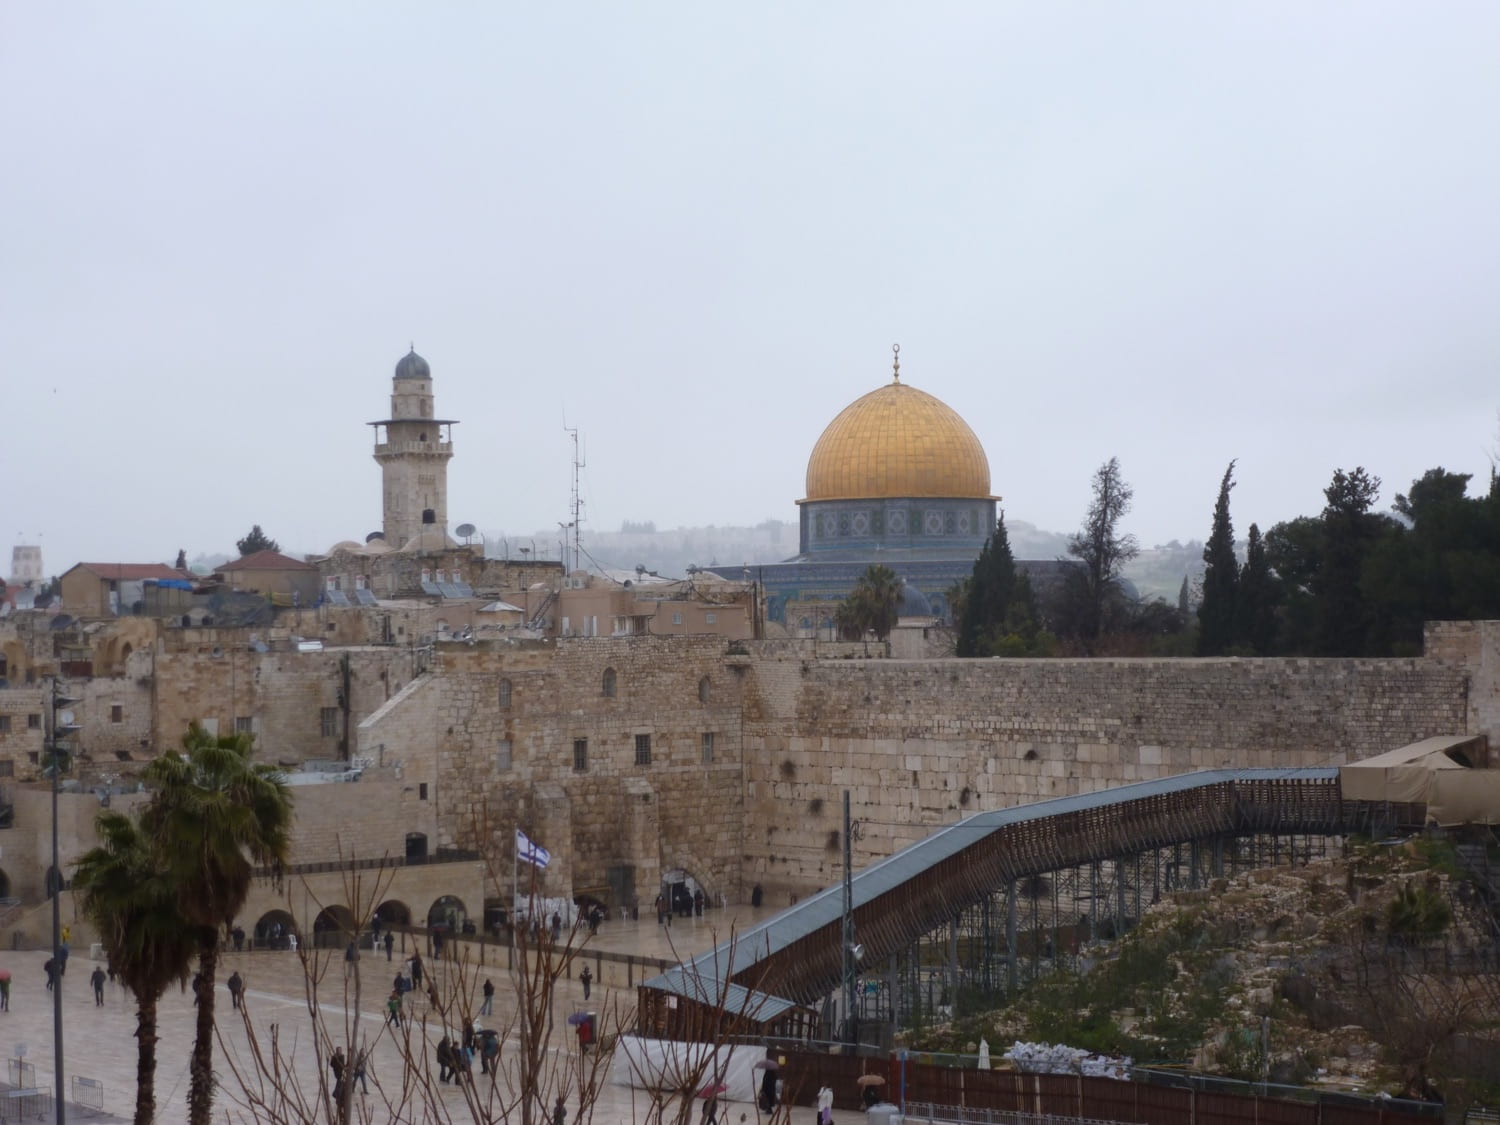 Image showing the wailing wall and al-Aqsa mosque in Jerusalem